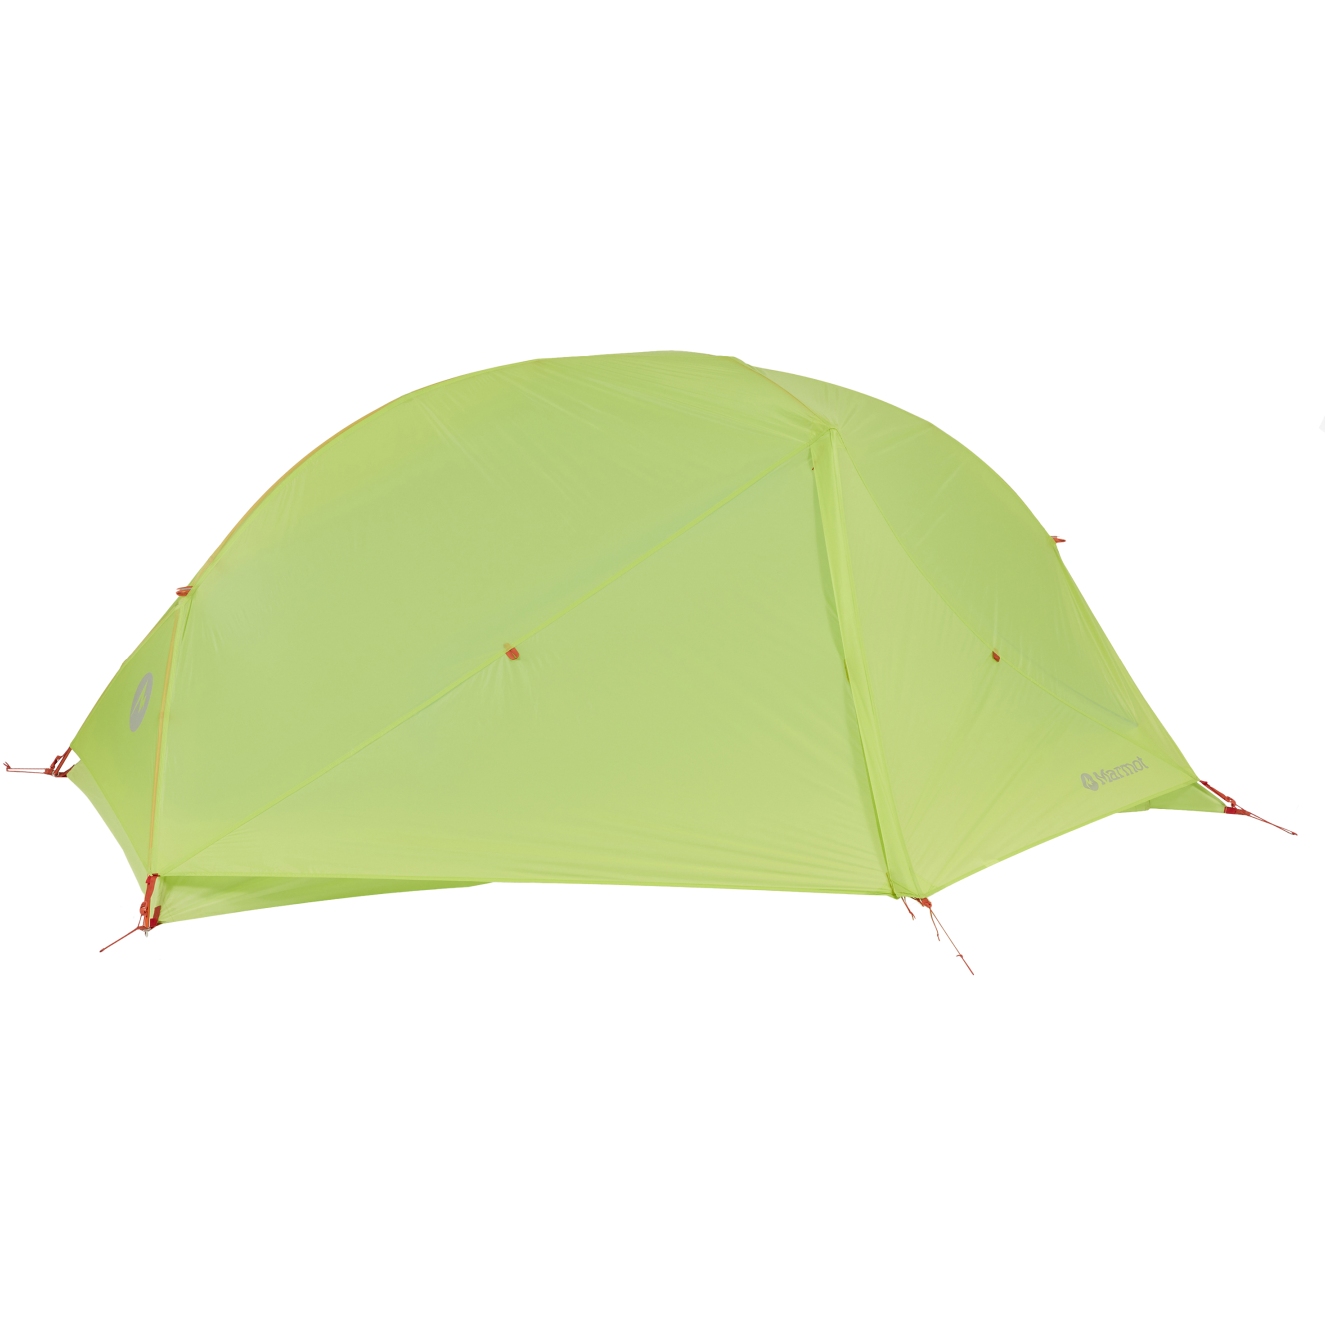 Picture of Marmot Superalloy 3P Tent - green glow